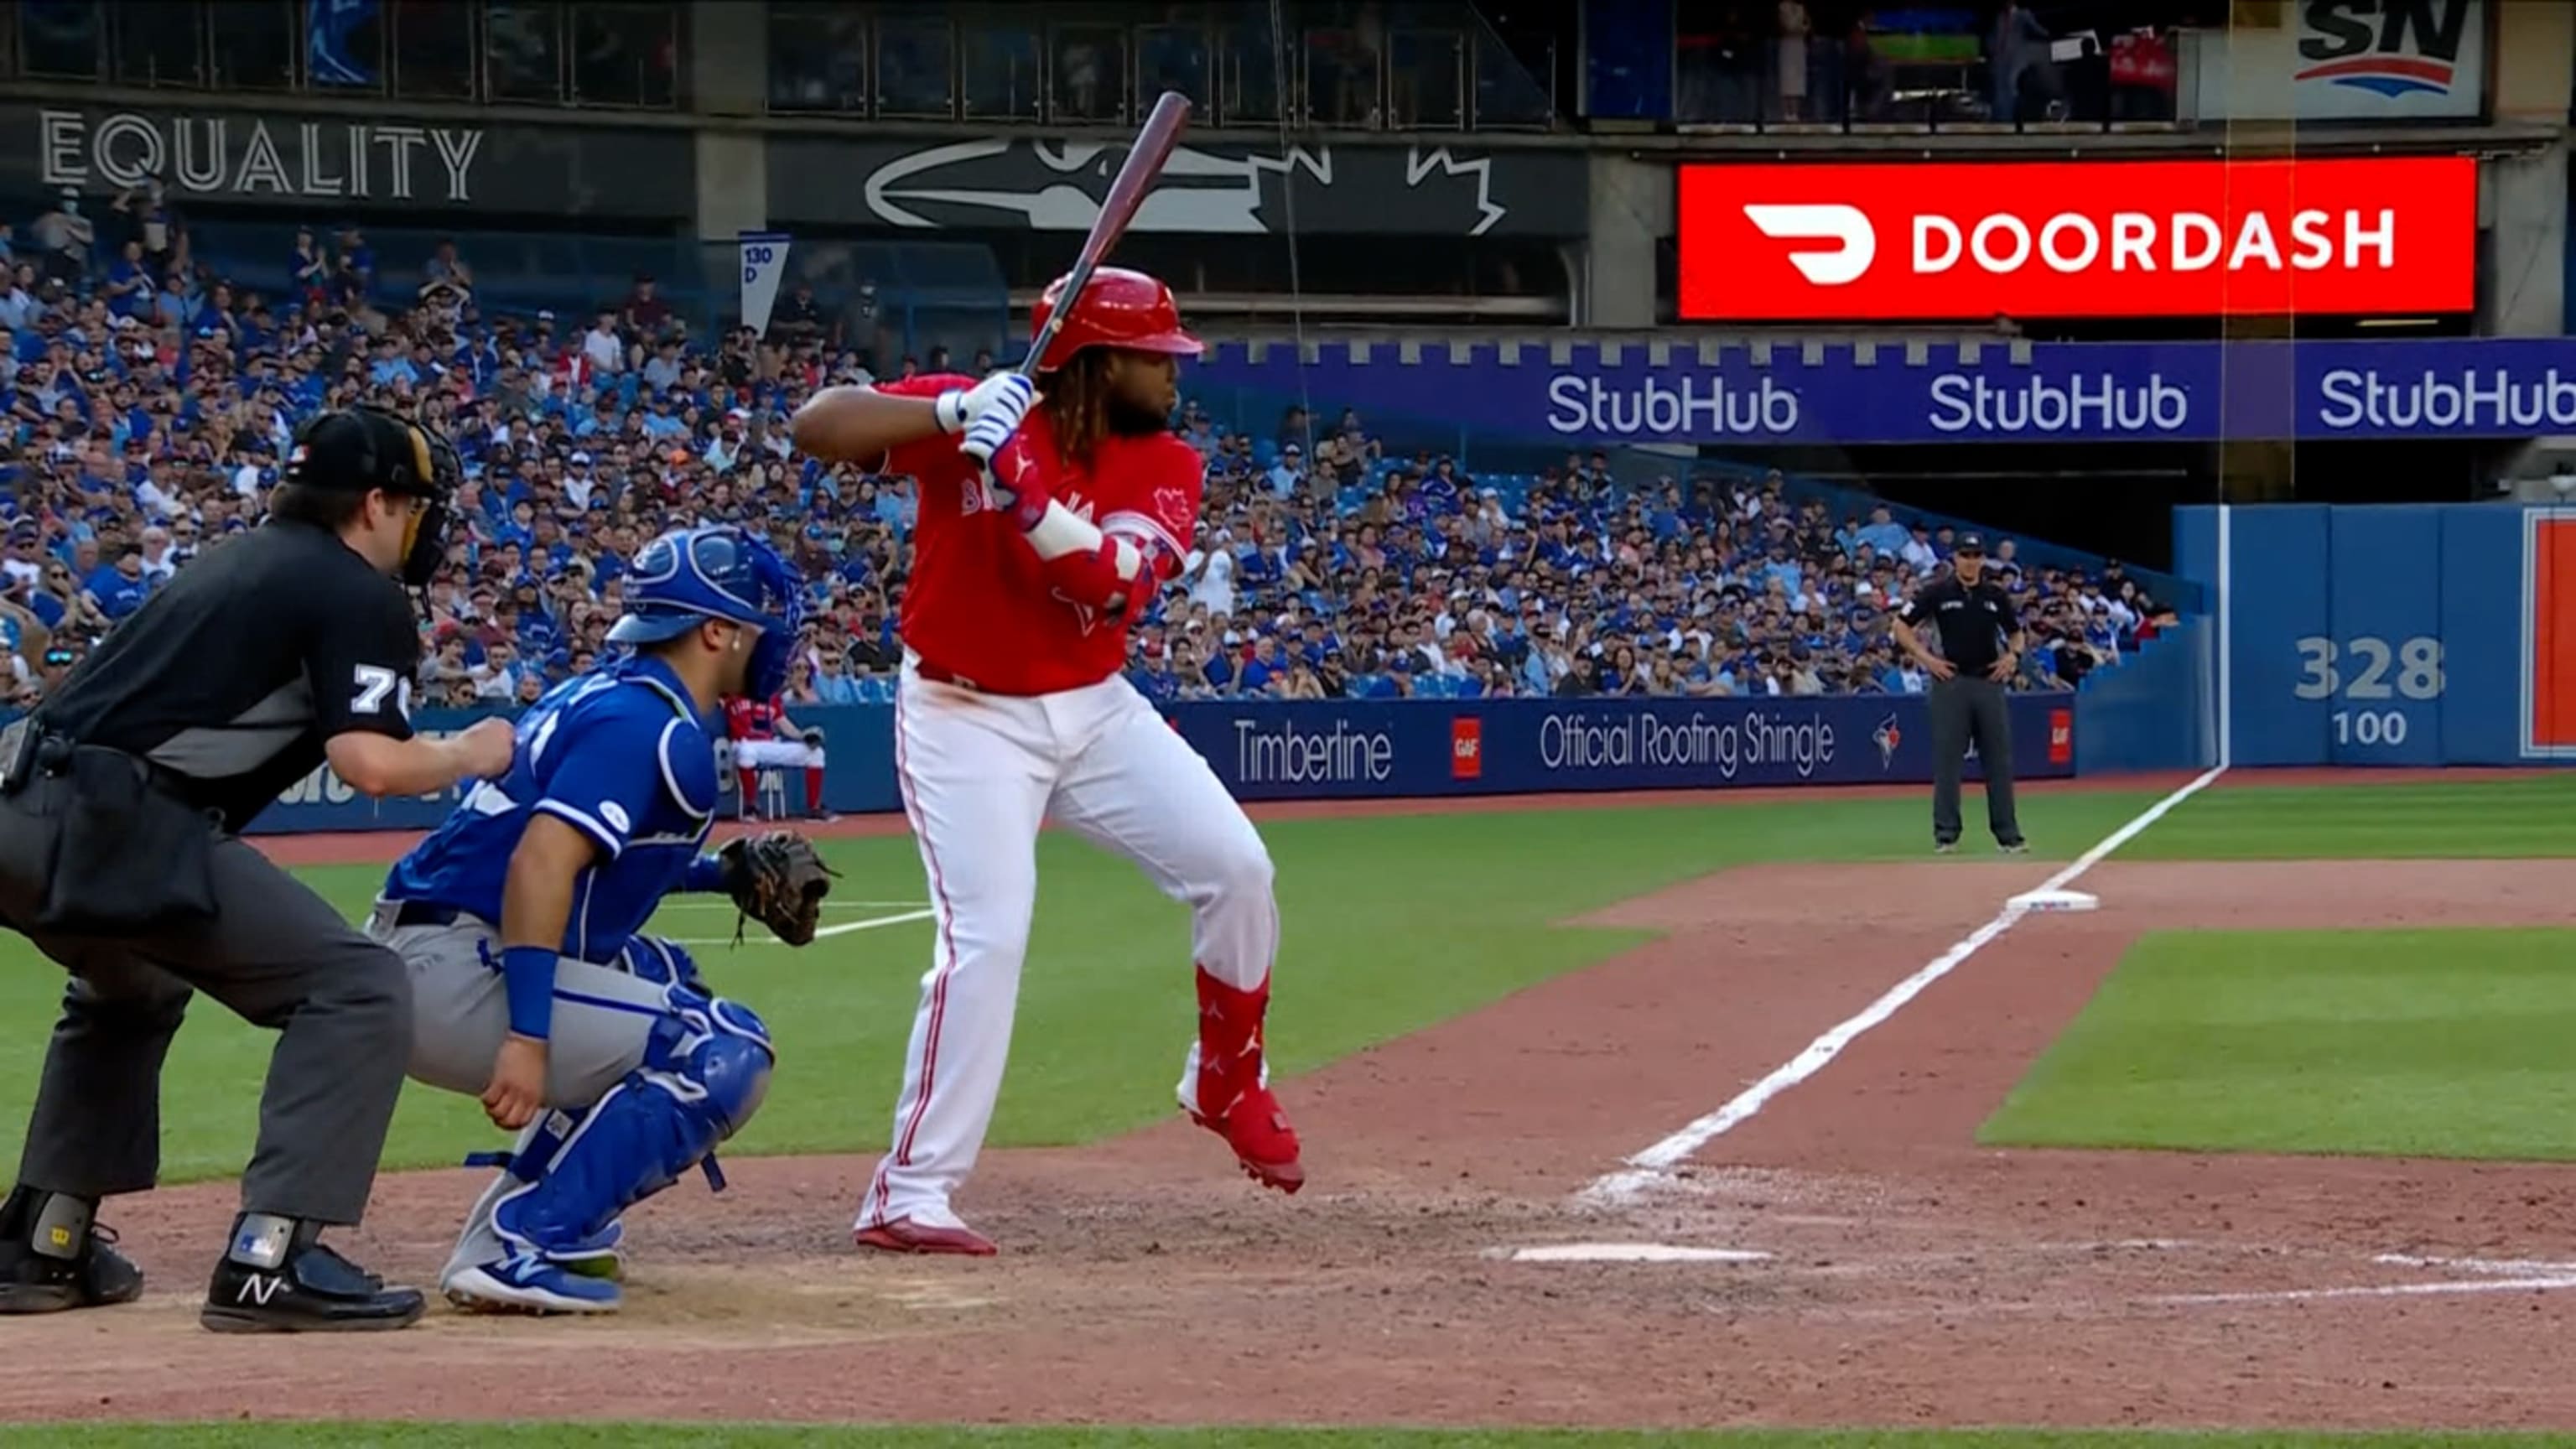 Blue Jays: Vlad Guerrero Jr. finishes 2nd in exhilarating Home Run Derby